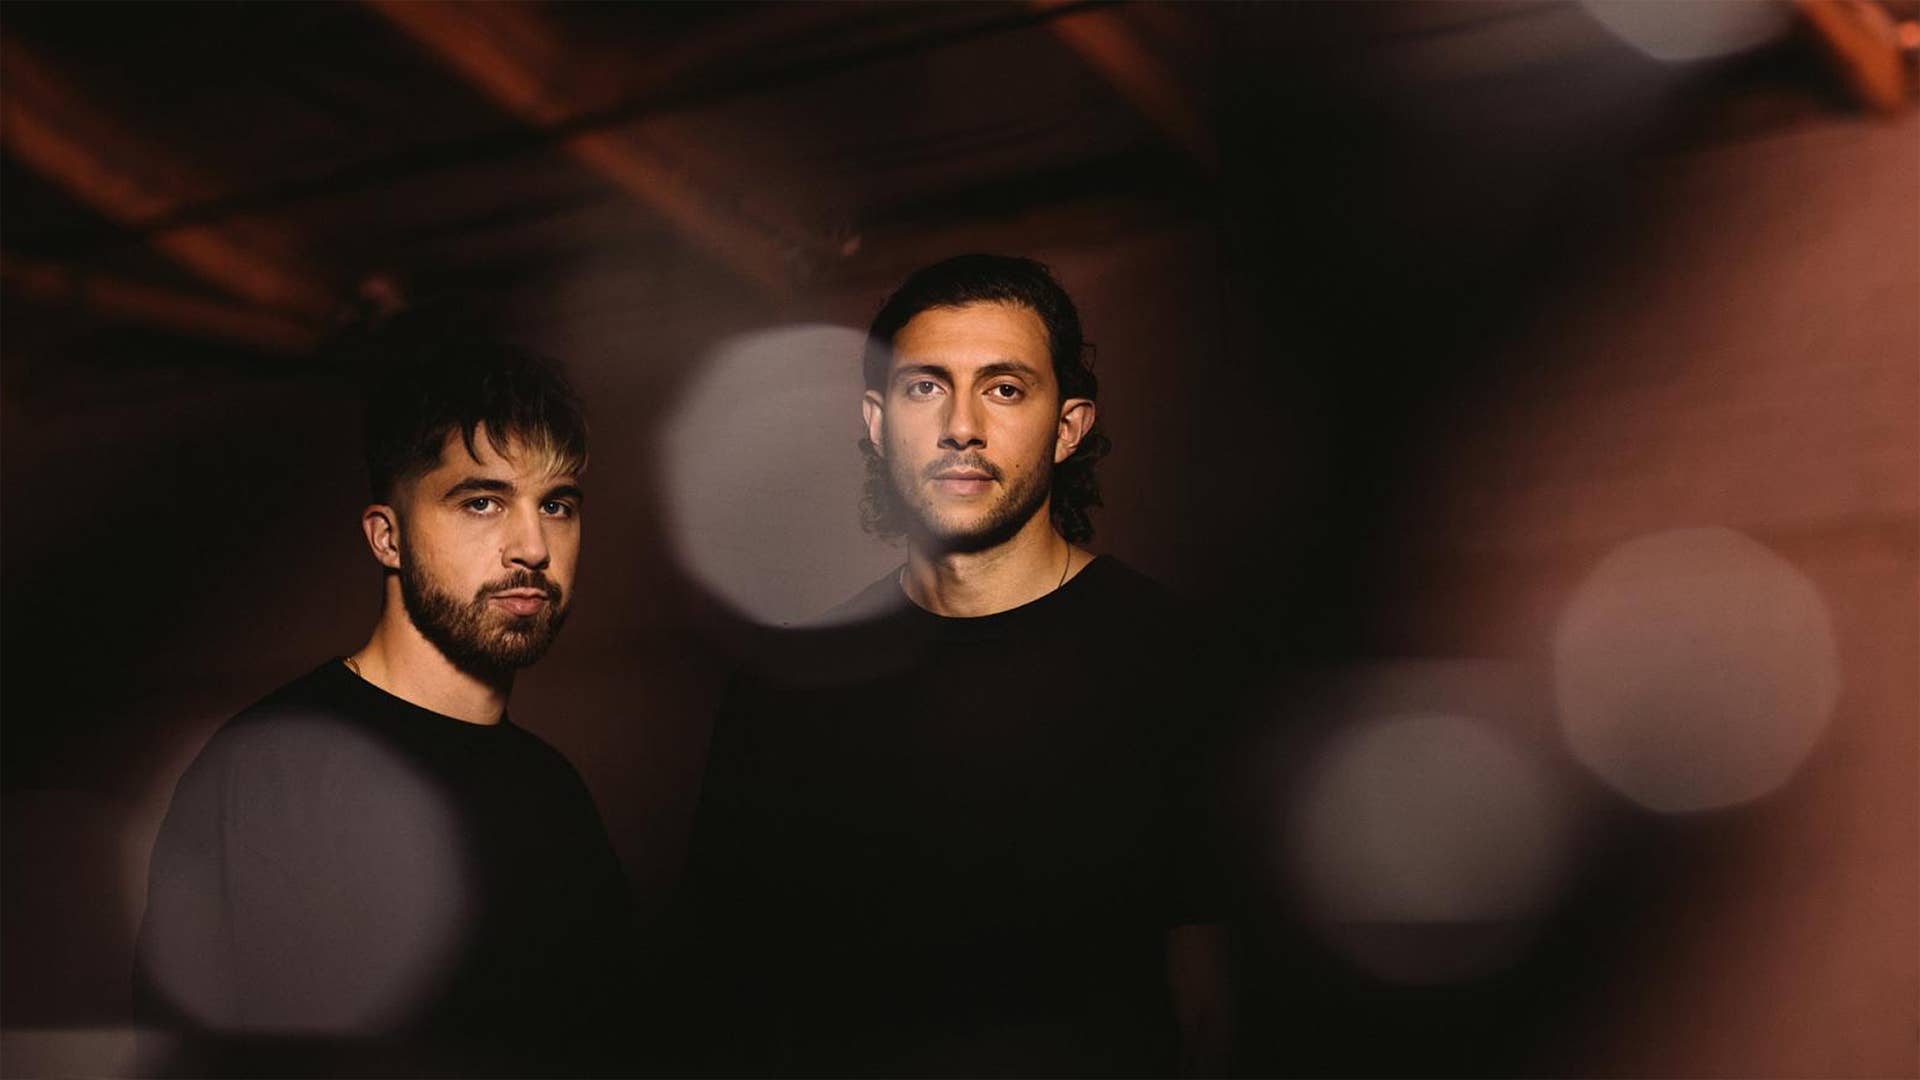 Majid Jordan posing together for their new album 'Wildest Dreams'